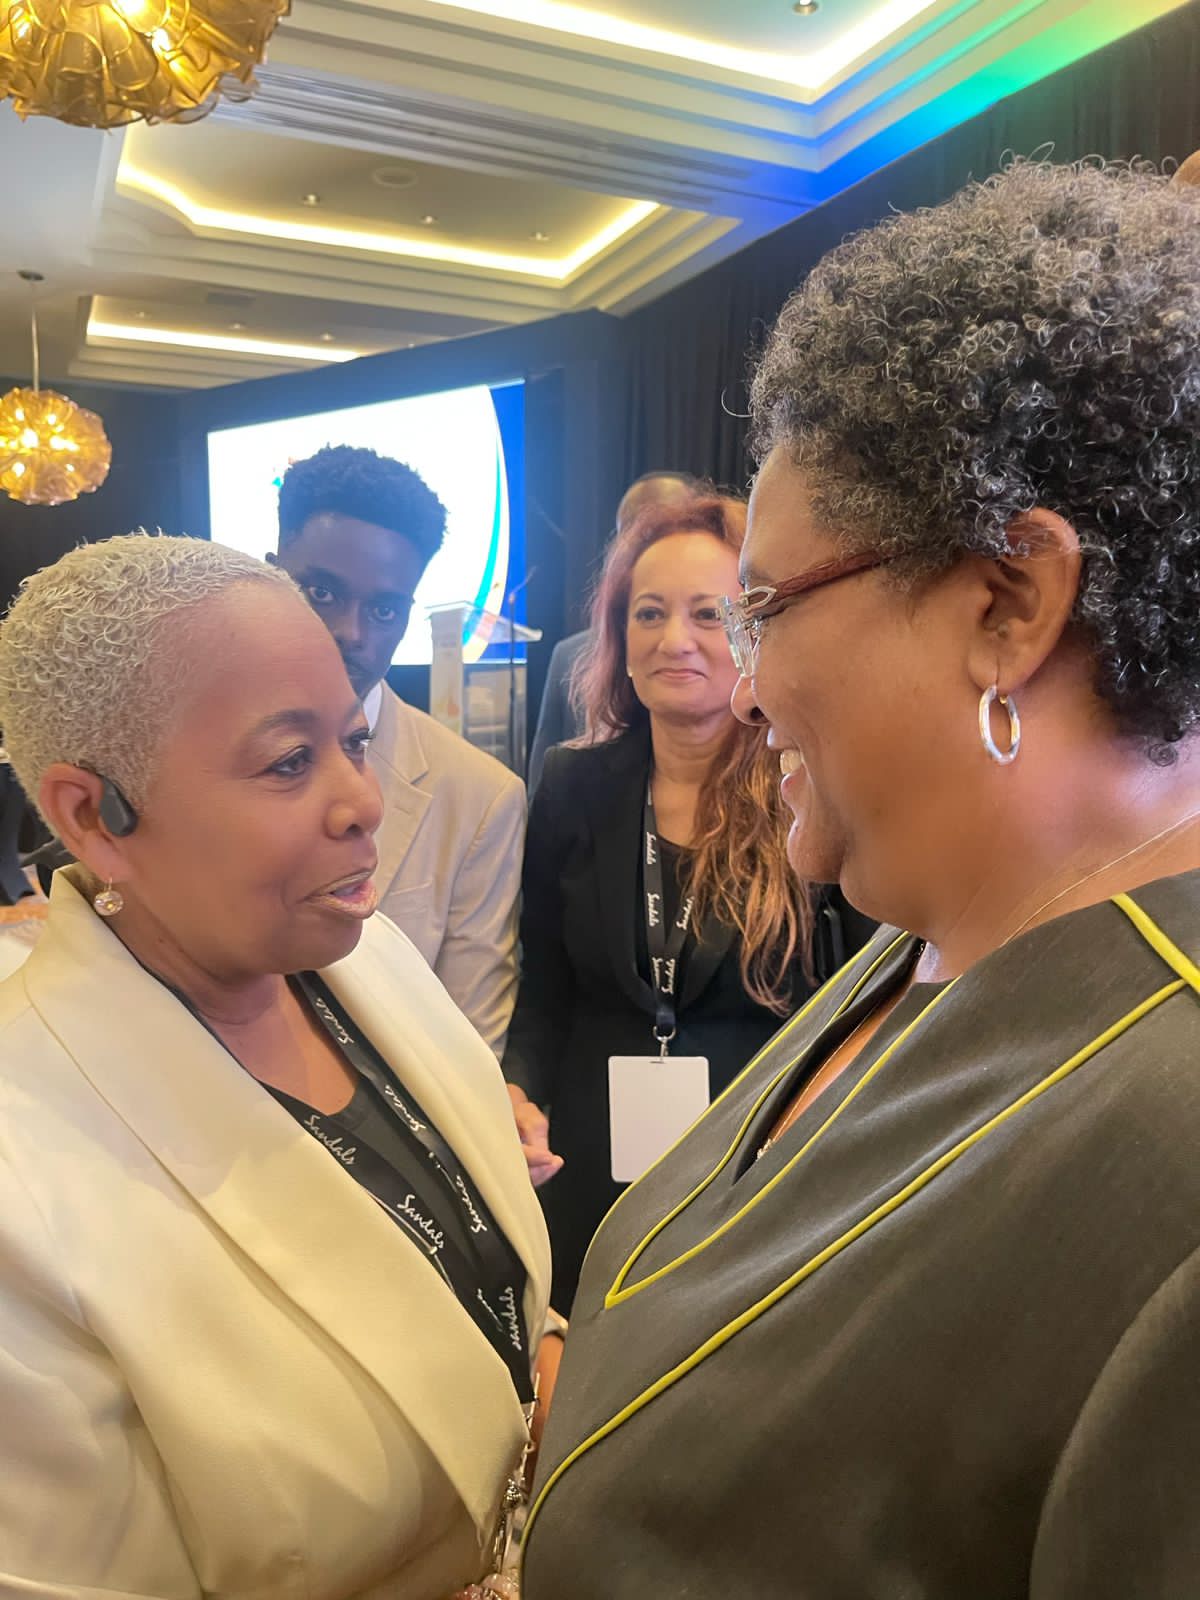 BVIYHTA Head Shares Moment With PM Mottley While Attending CHTA MarketPlace